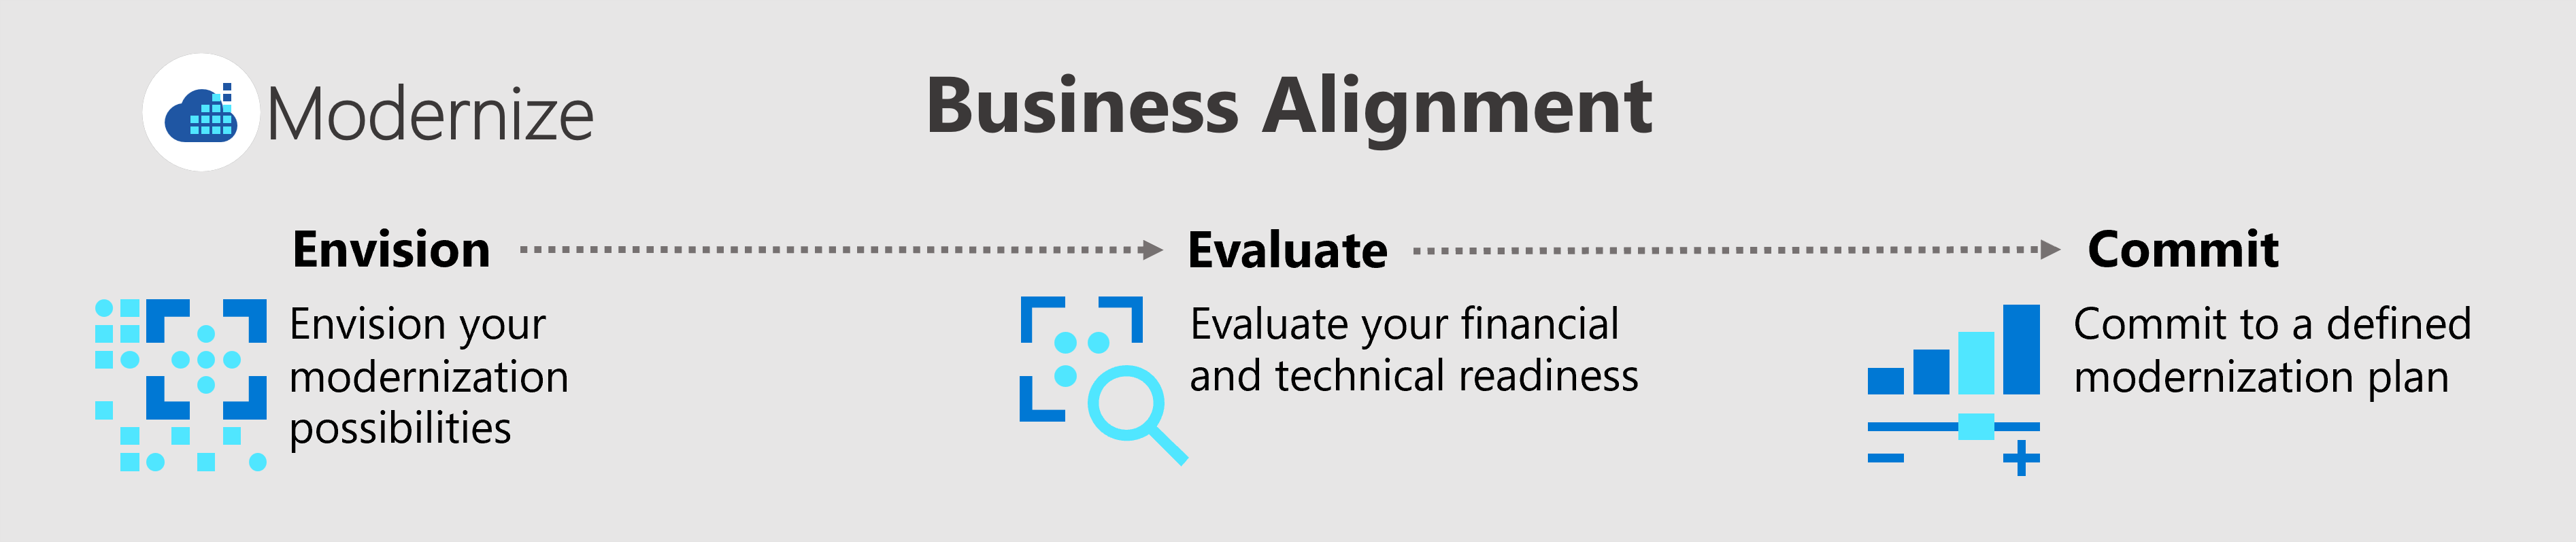 Diagram that shows the business alignment process. It shows the envision, evaluate, and commit processes ordered from left to right.